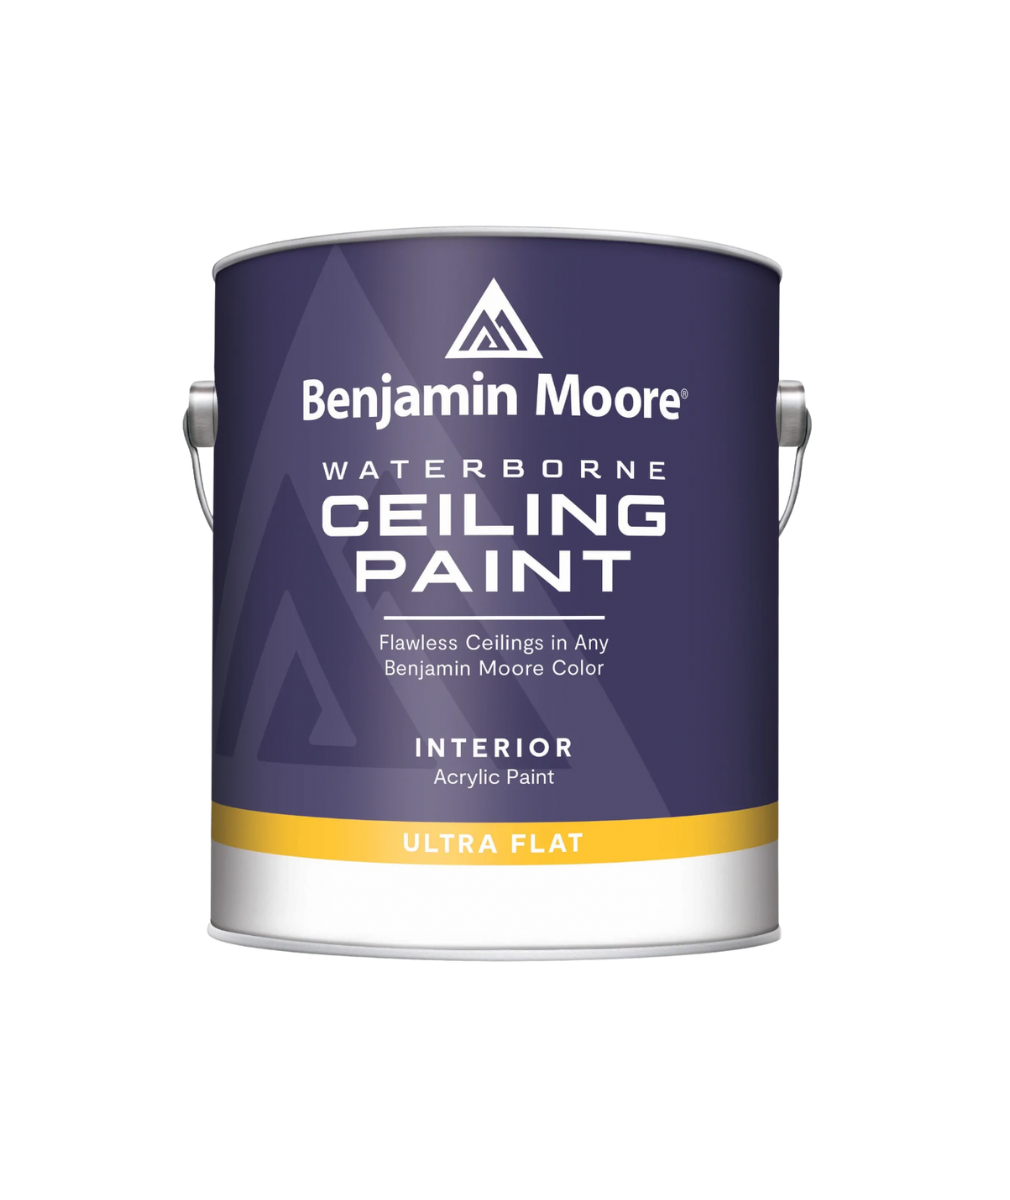 Benjamin Moore Waterborne Ceiling Paint available at JC Licht.